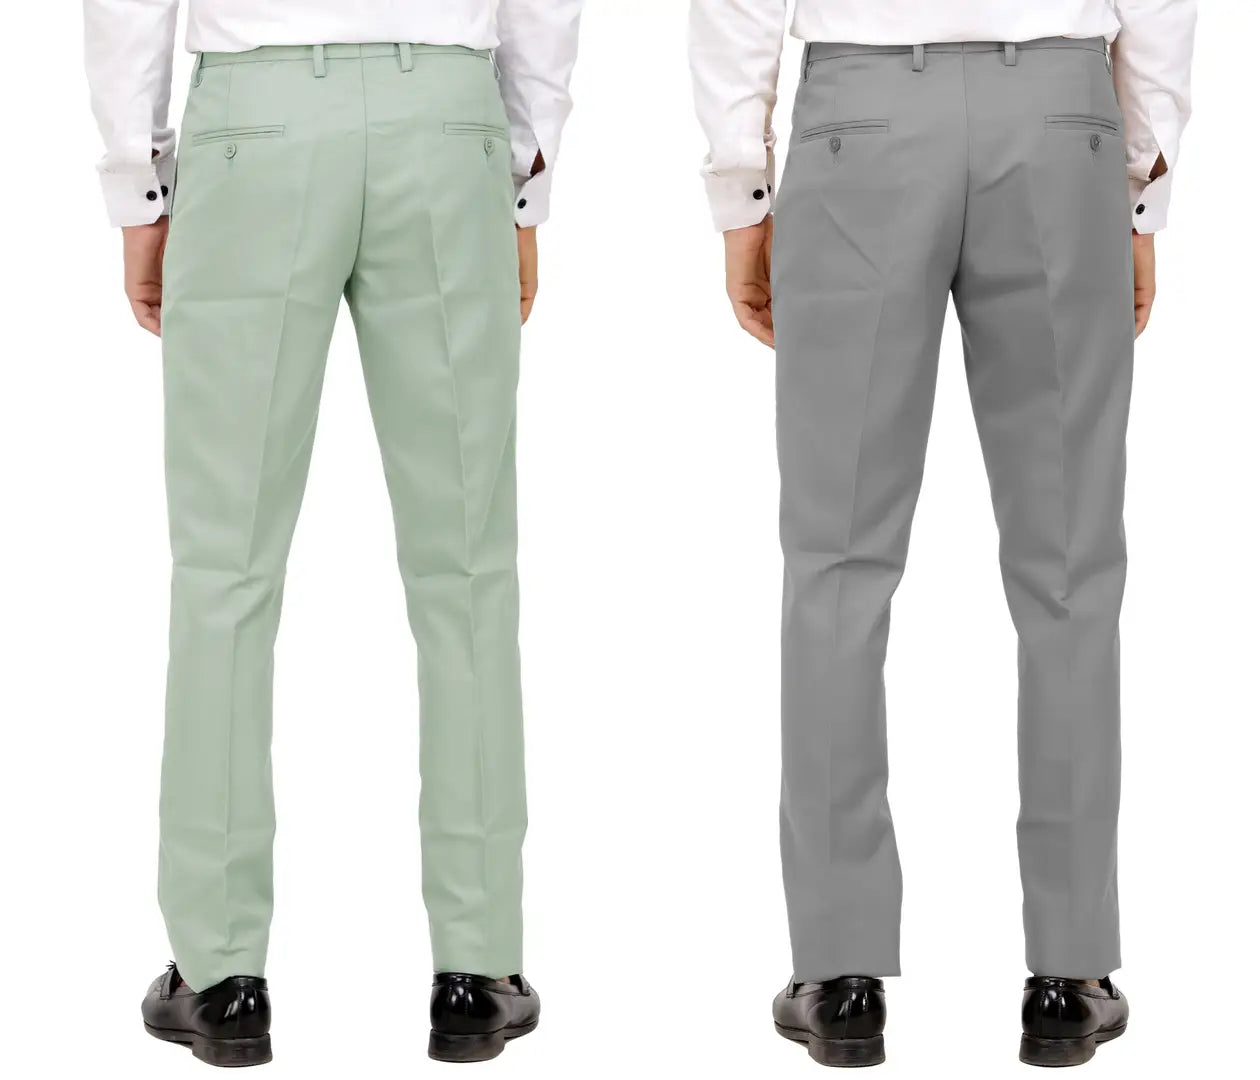 Kundan Men Poly-Viscose Blended Olive Green and Light Cot Grey Formal Trousers ( Pack of 2 Trousers )